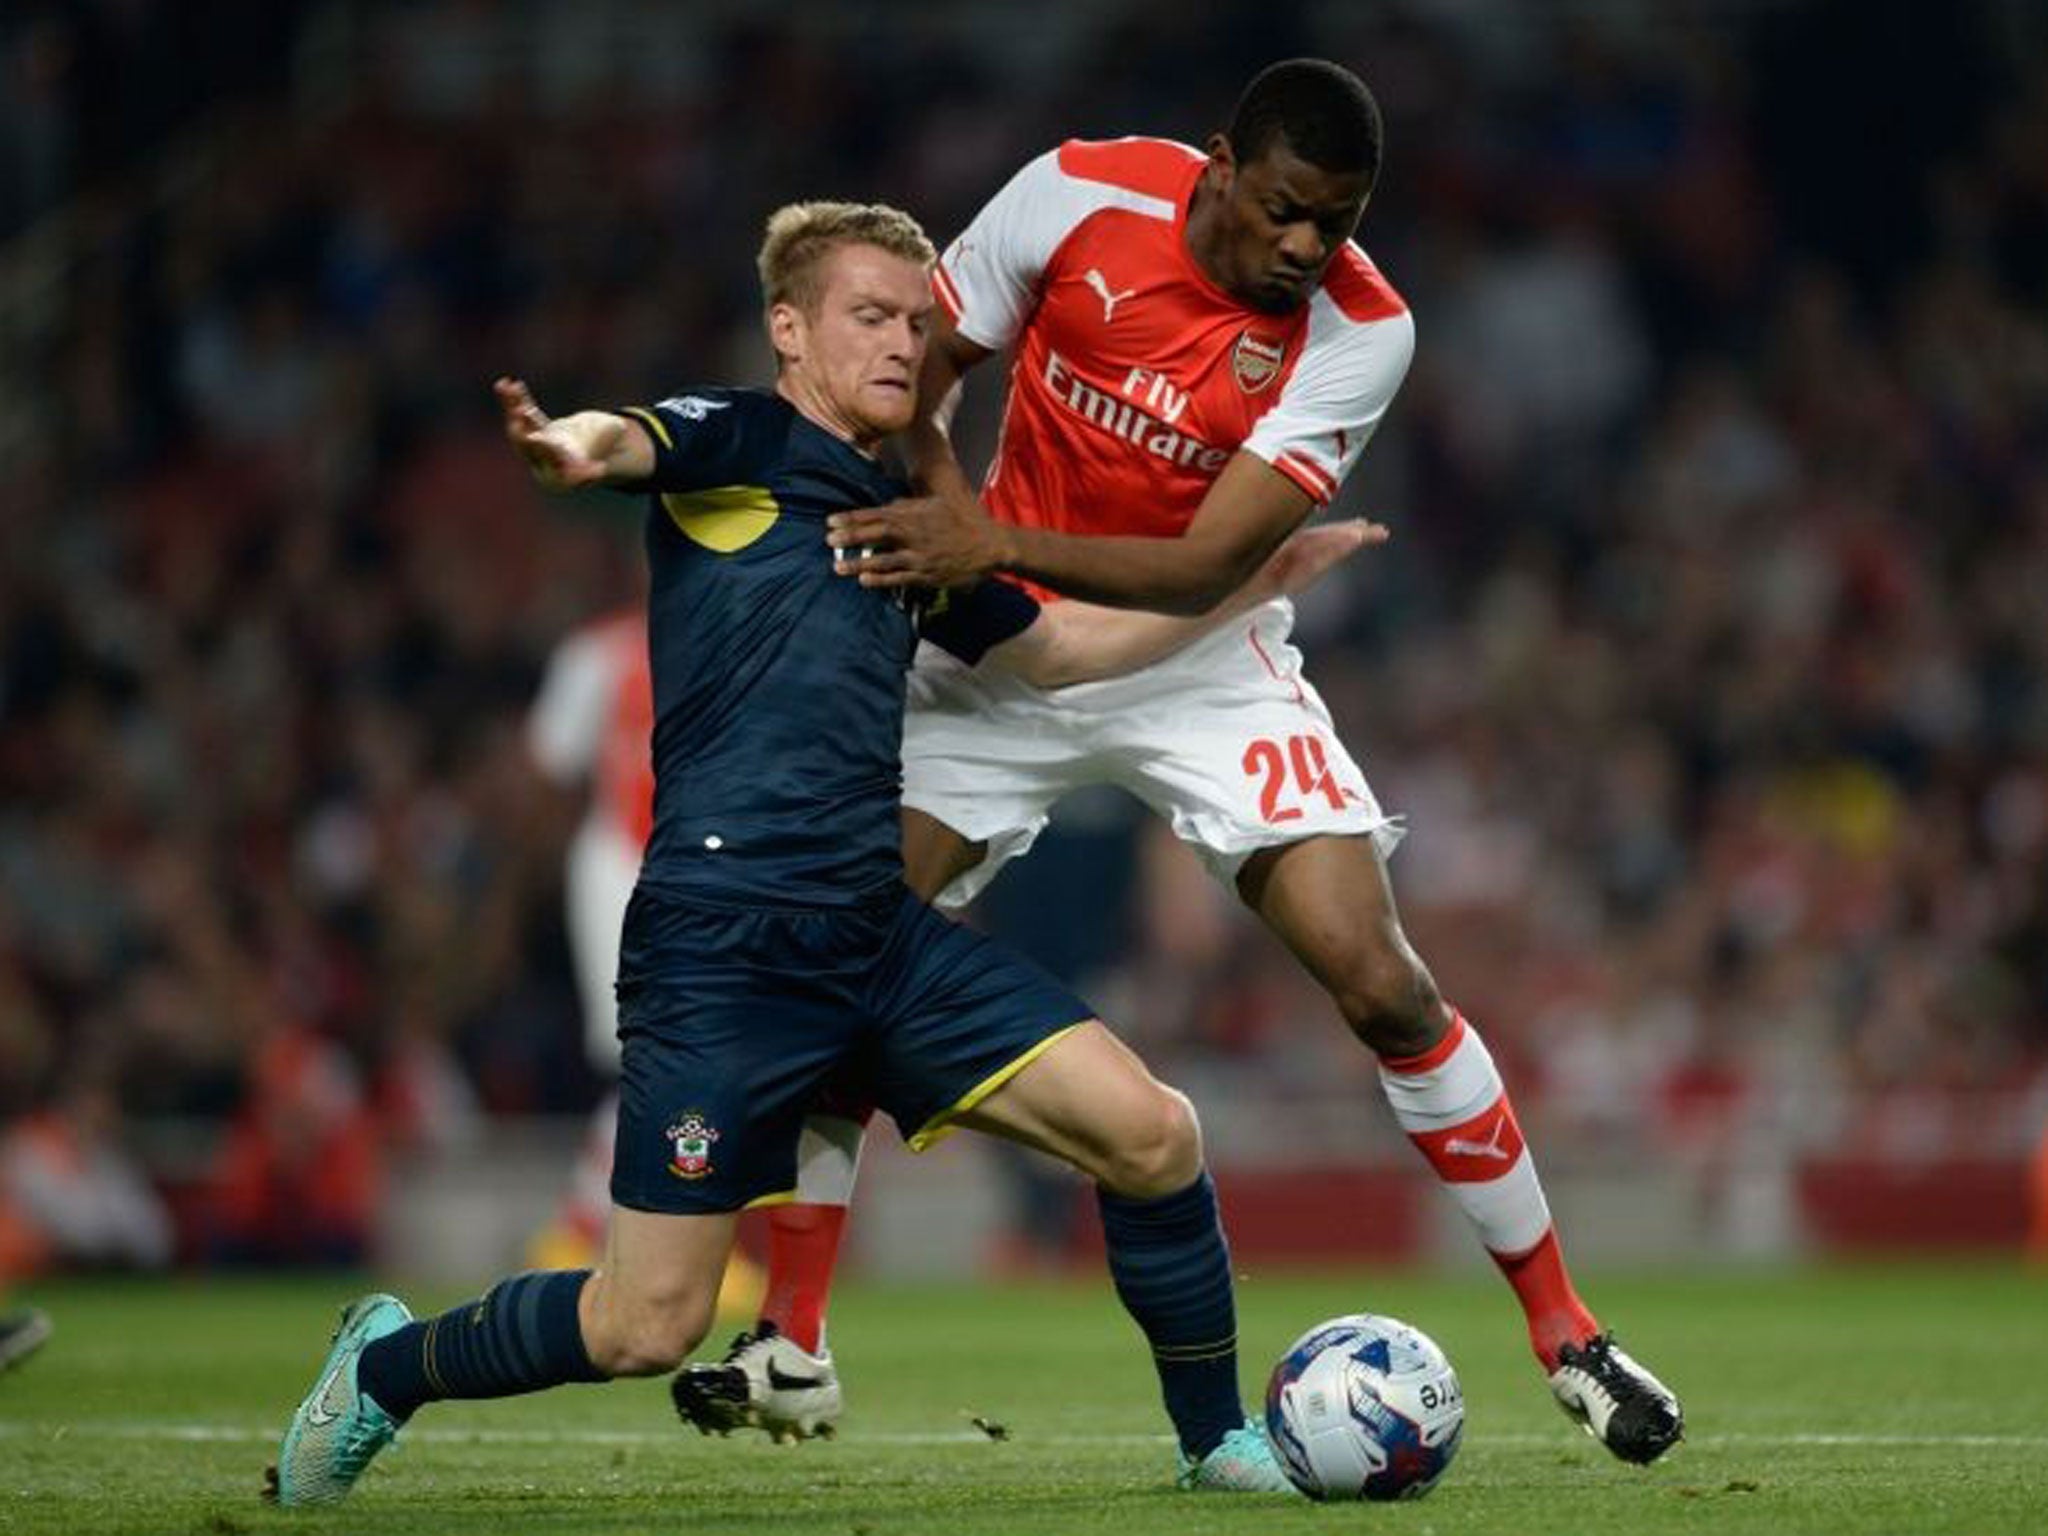 Arsenal's Abou Diaby against Southampton in September - his only appearance this season